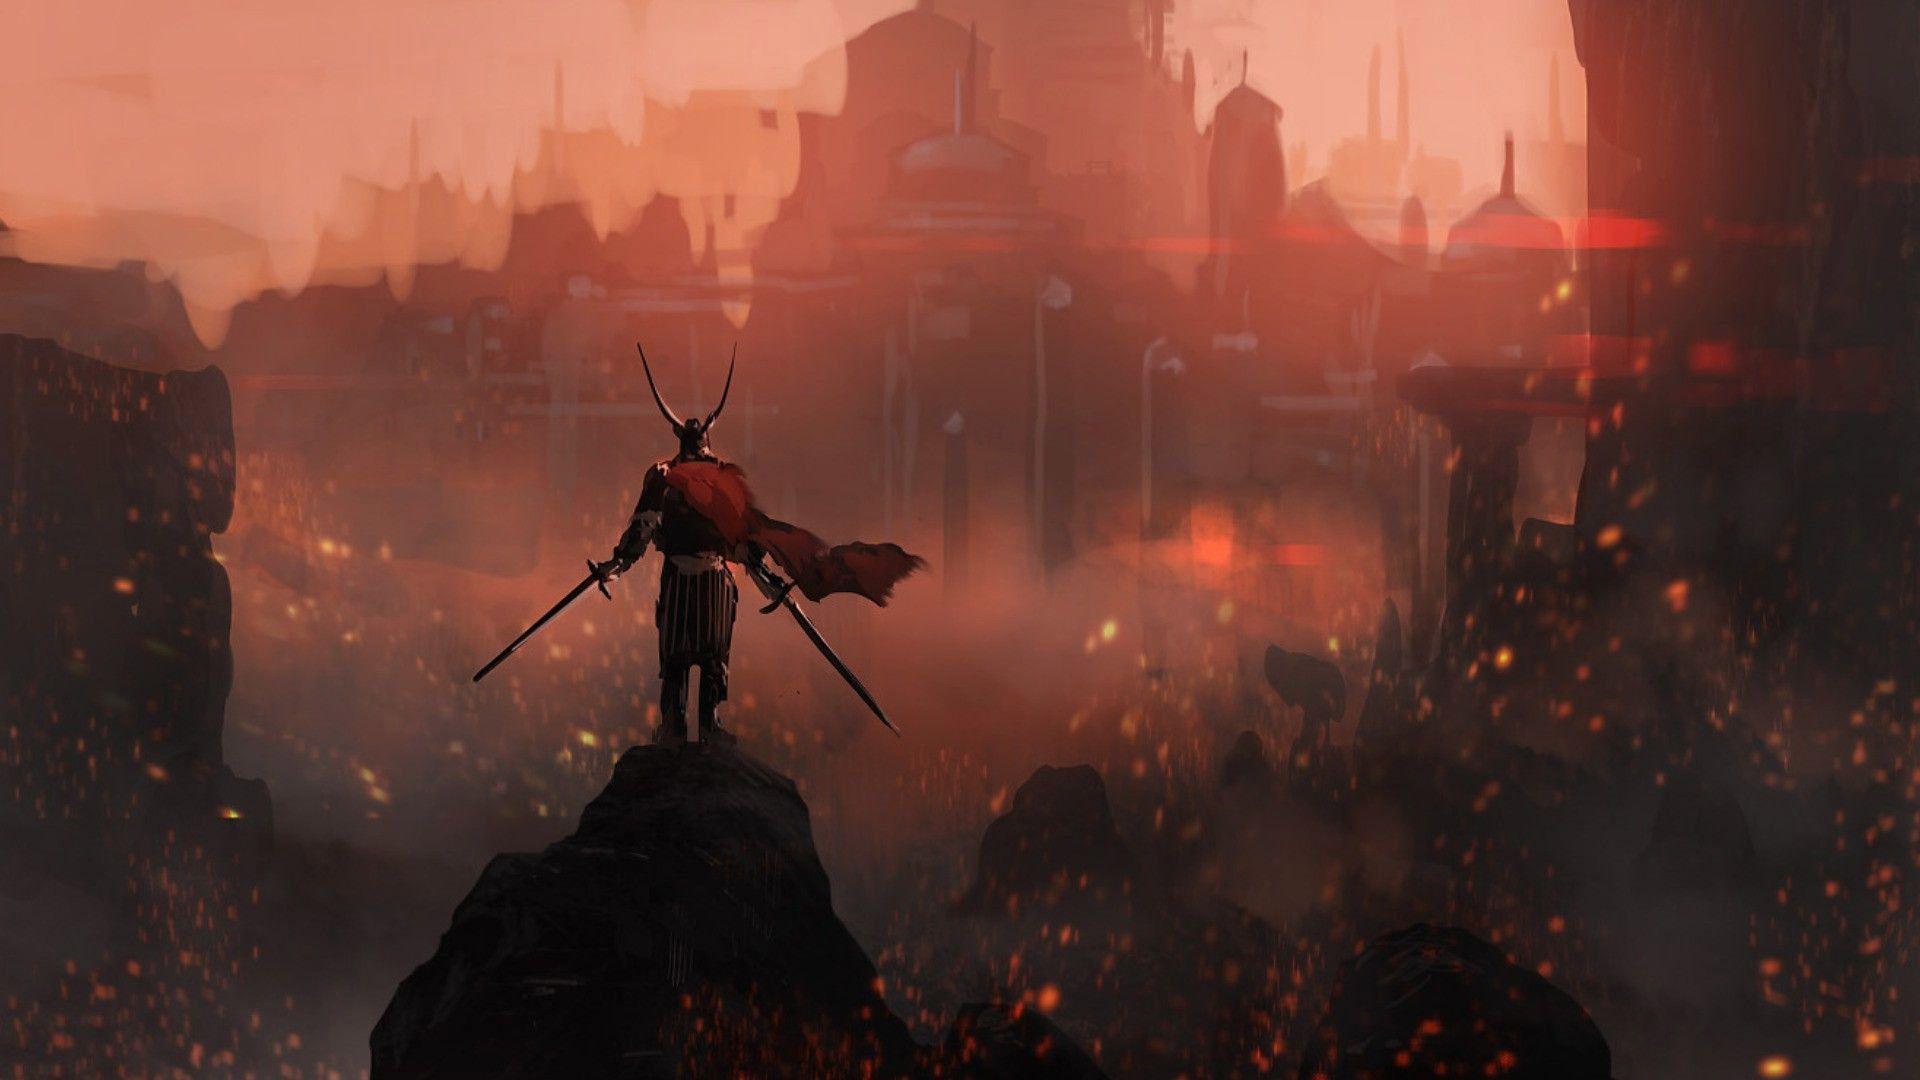 Viking on the background of the burning city wallpaper and image